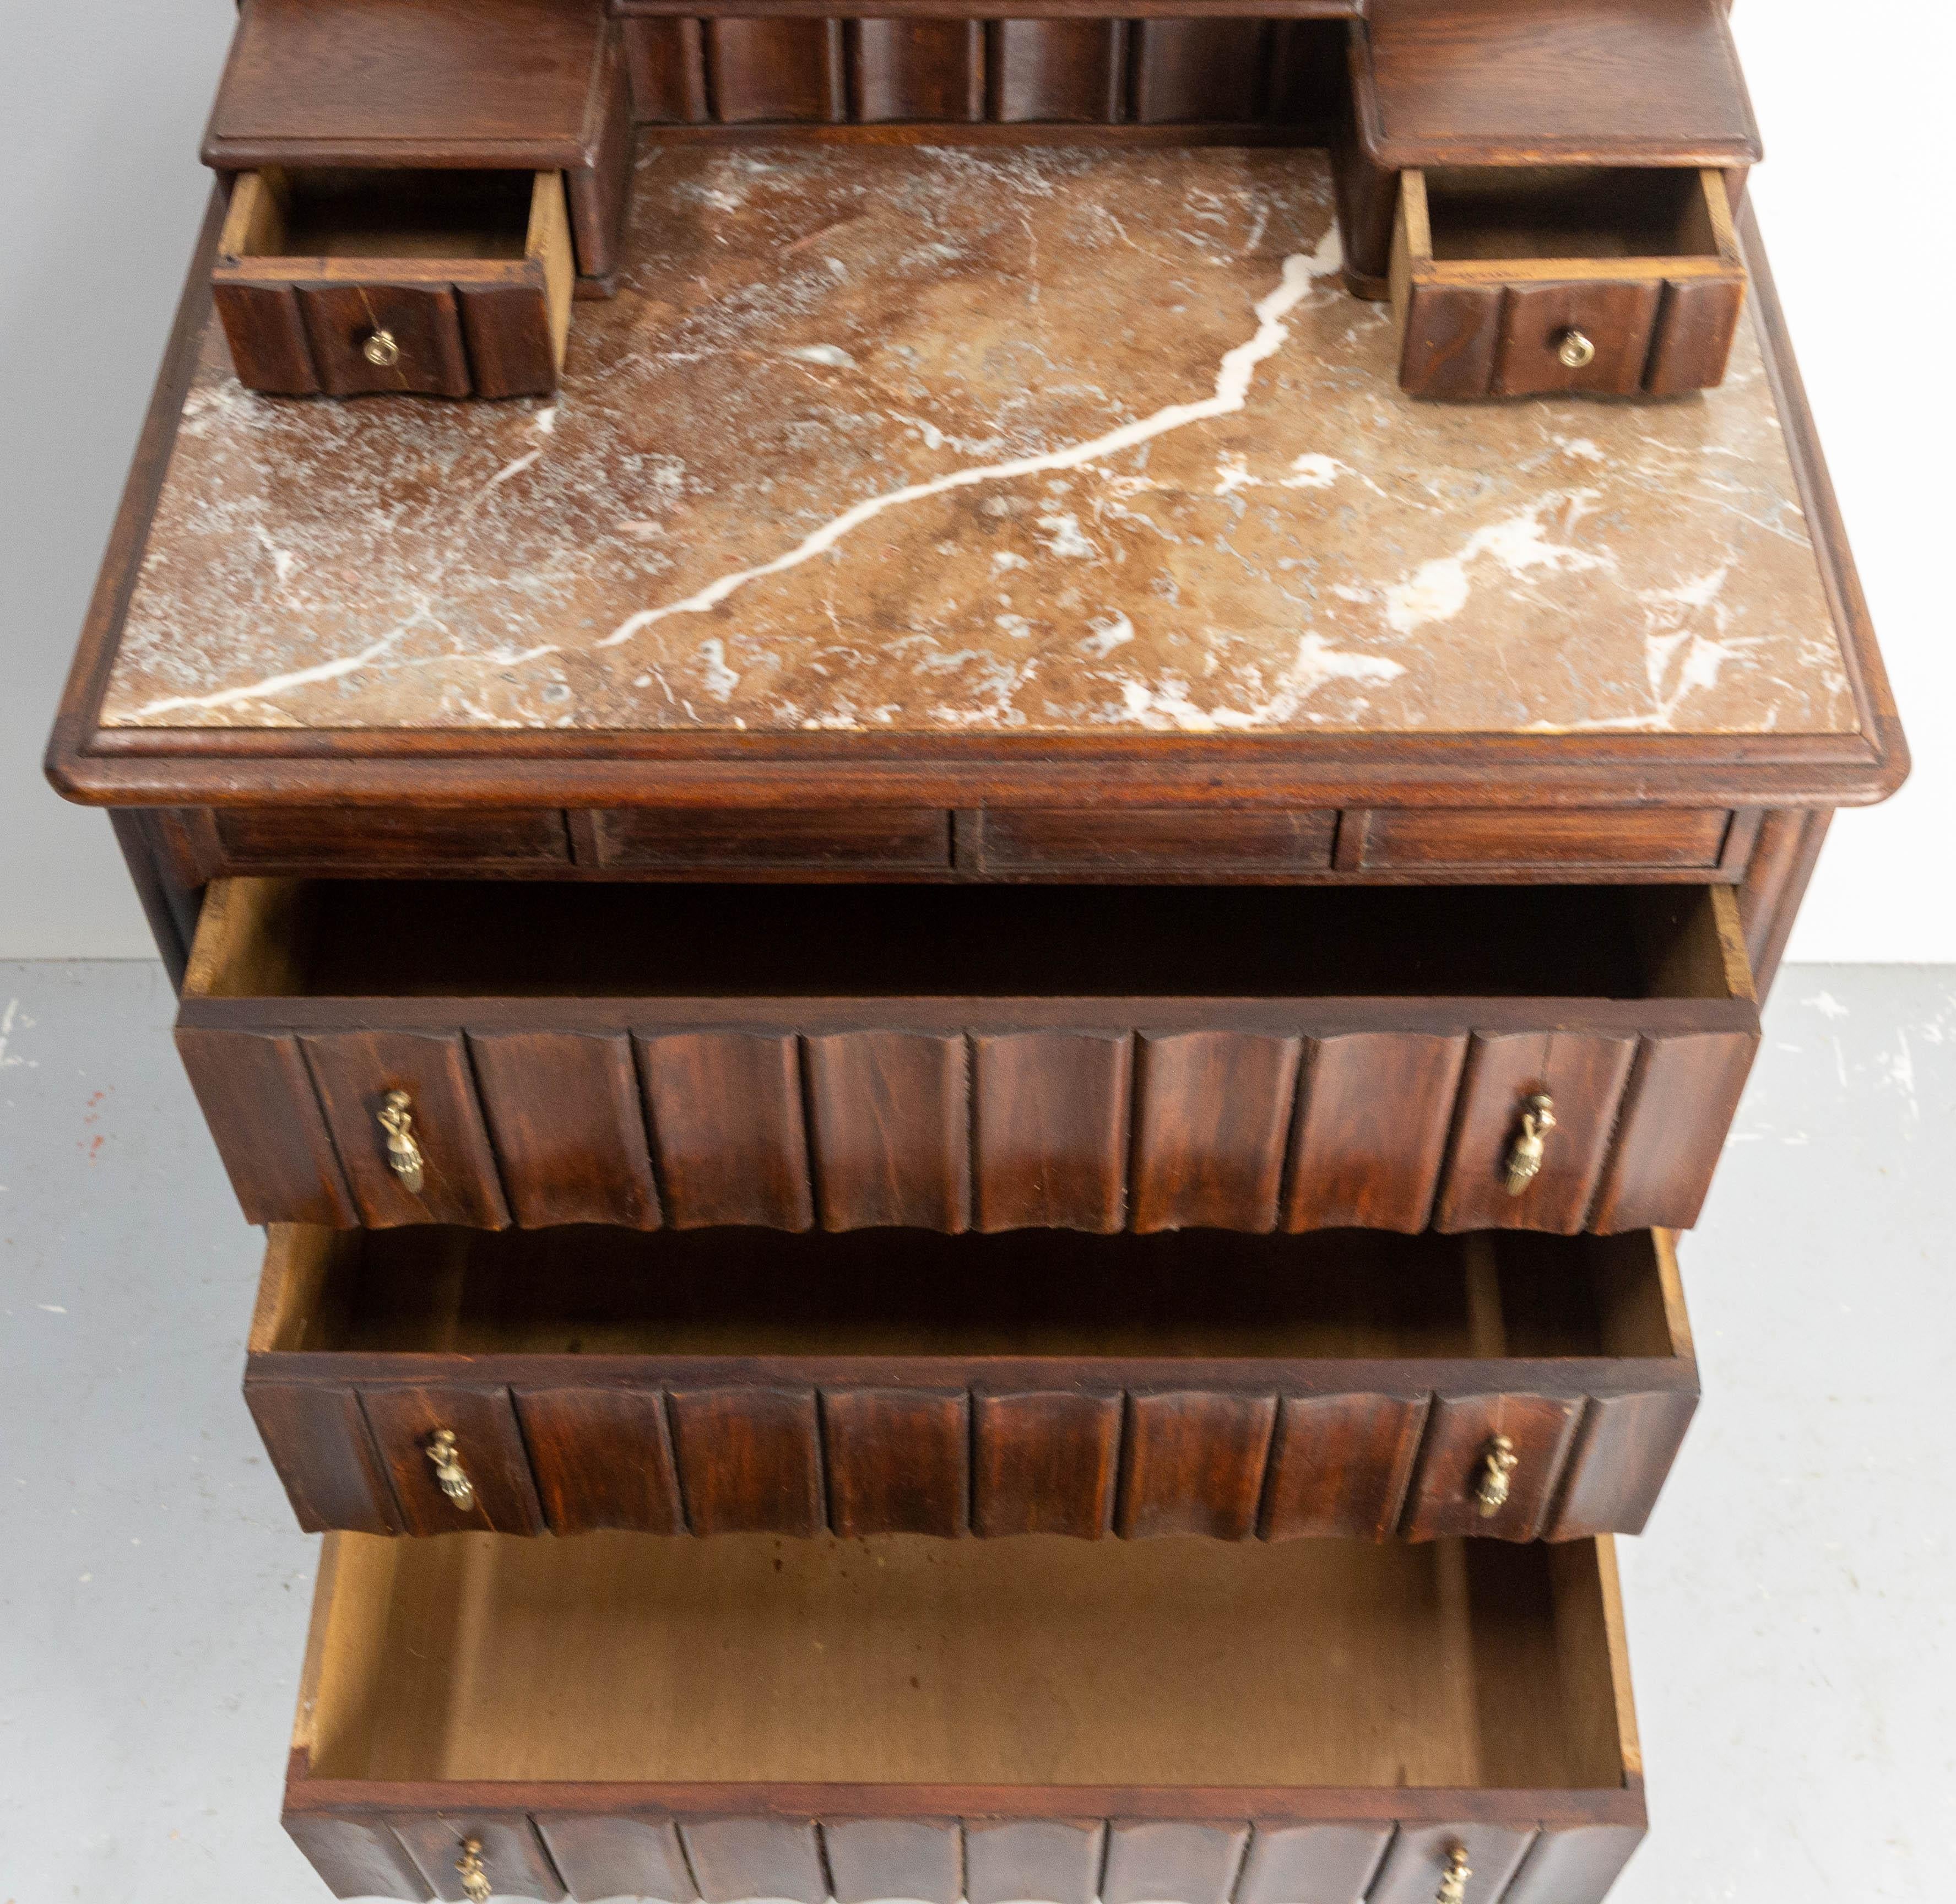 French Art Deco Dressing Table Vanity Unit with Drawers Marble & Mirror, c. 1930 For Sale 1